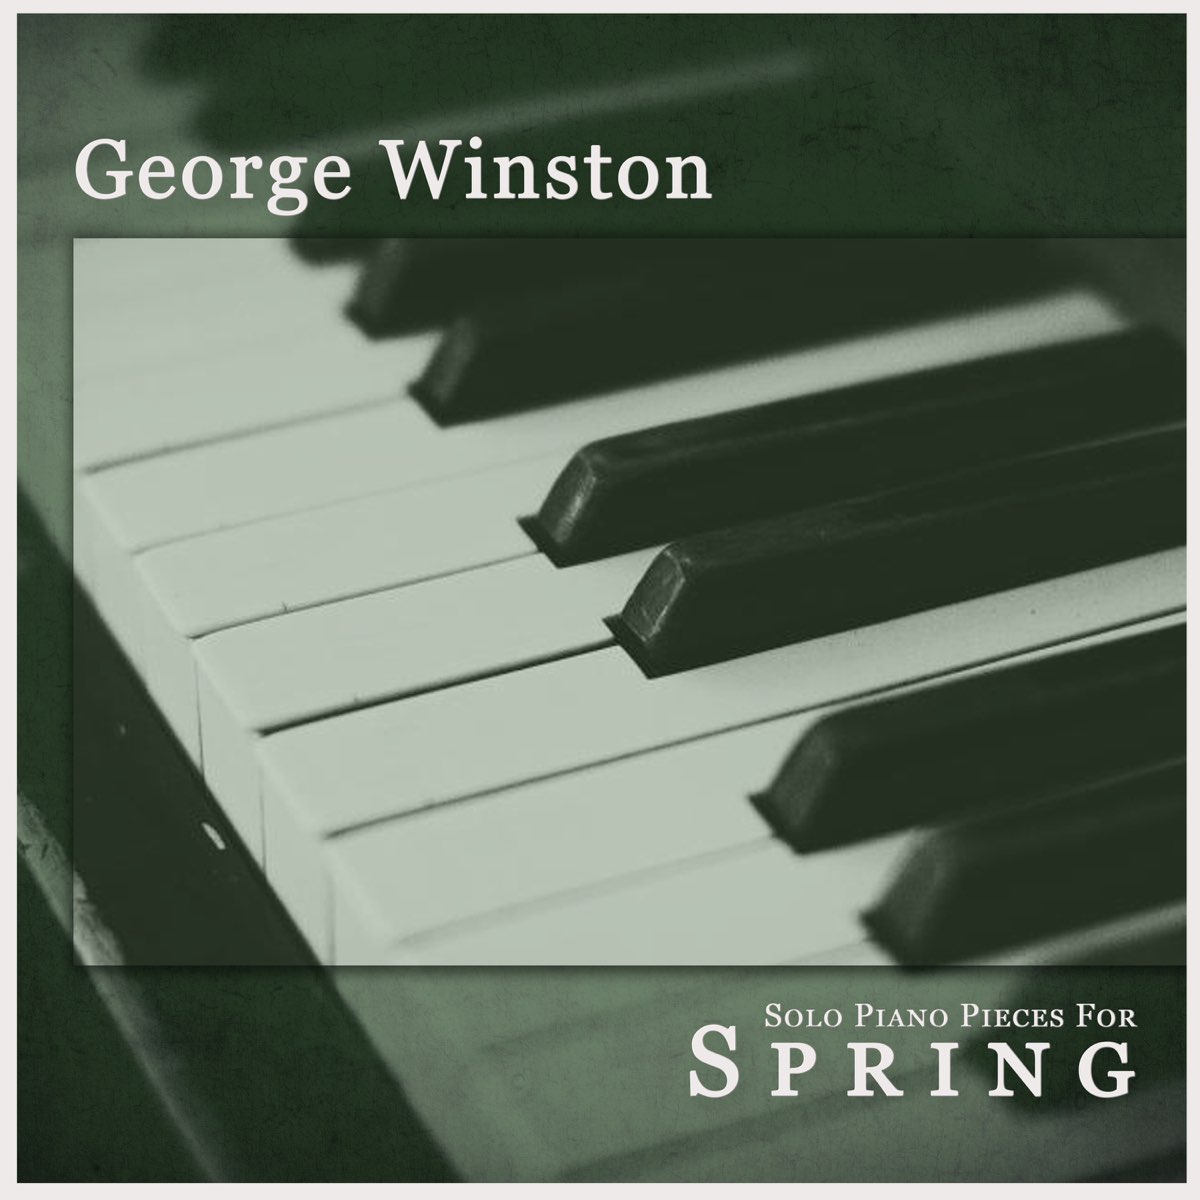 Solo Piano Pieces for Spring - EP by George Winston on Apple Music